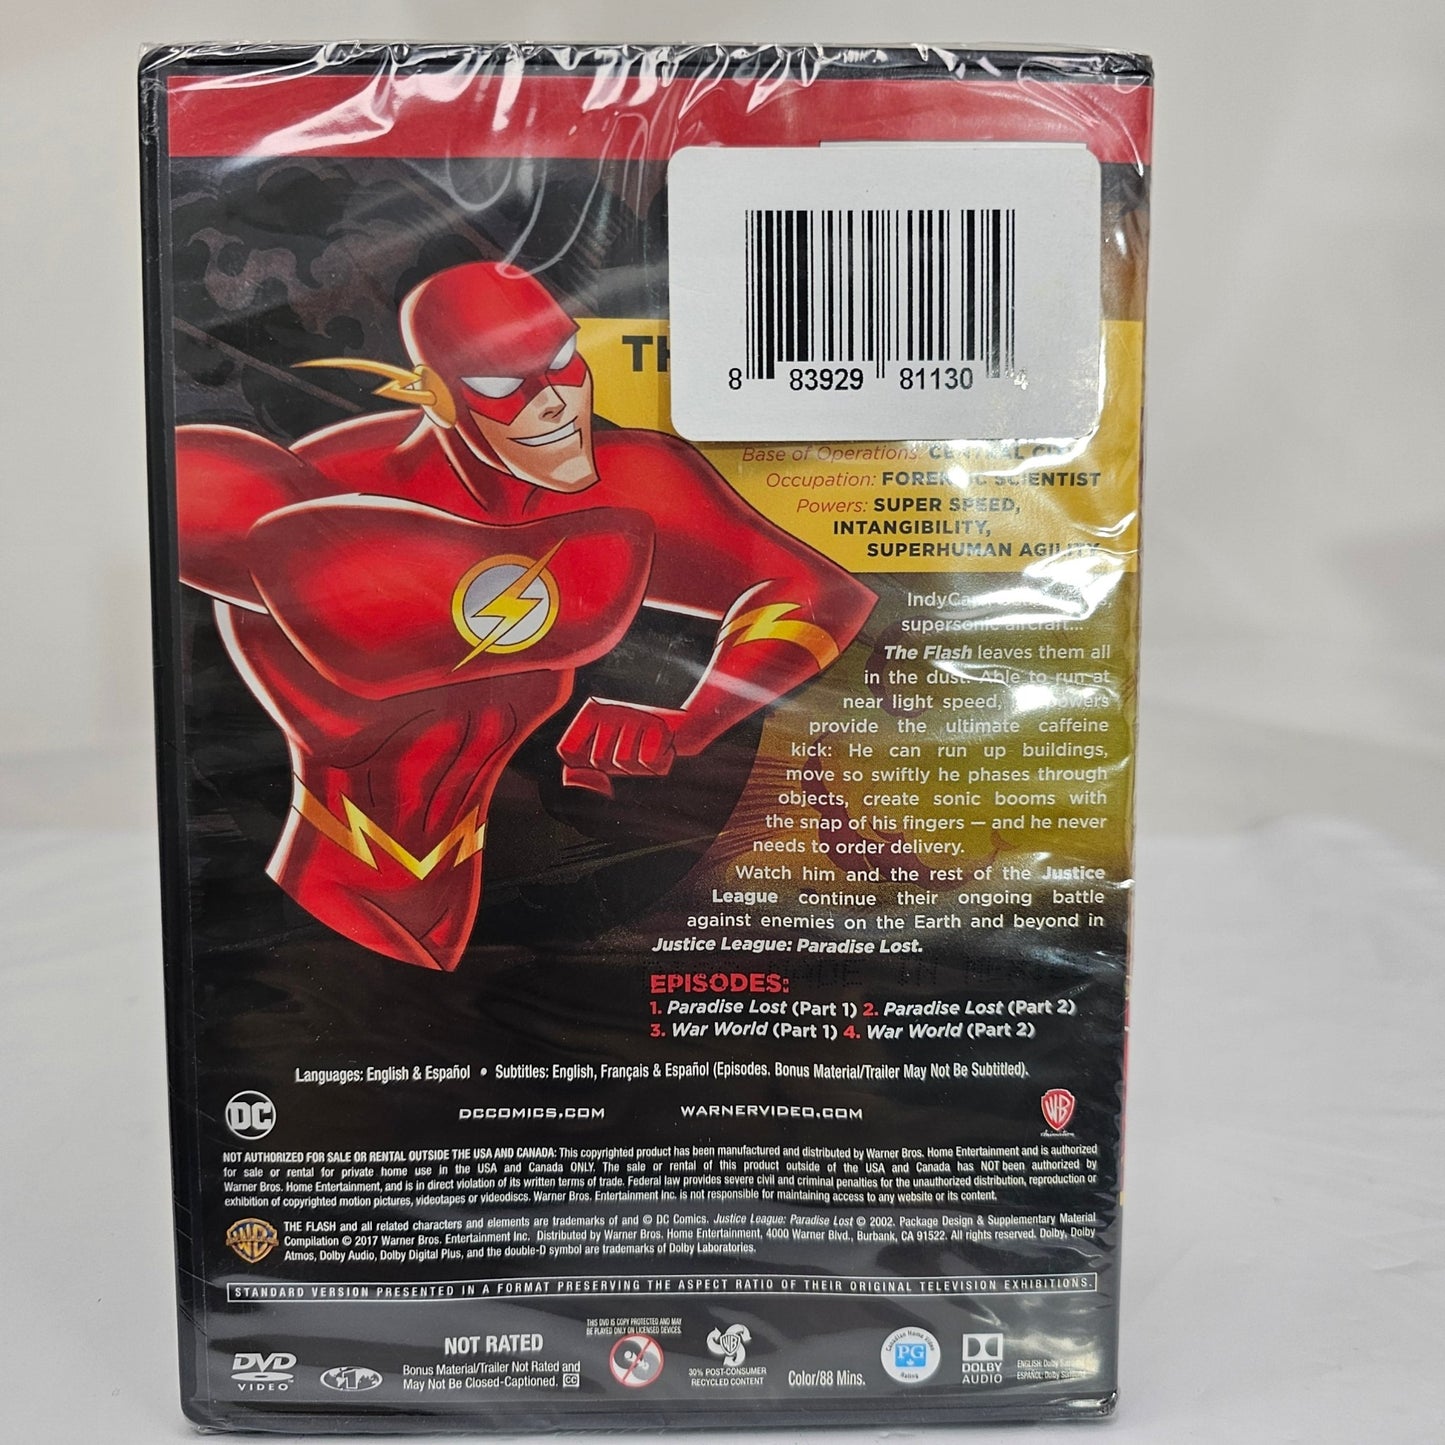 DC Super Heroes: The Flash DVD - DQ Distribution